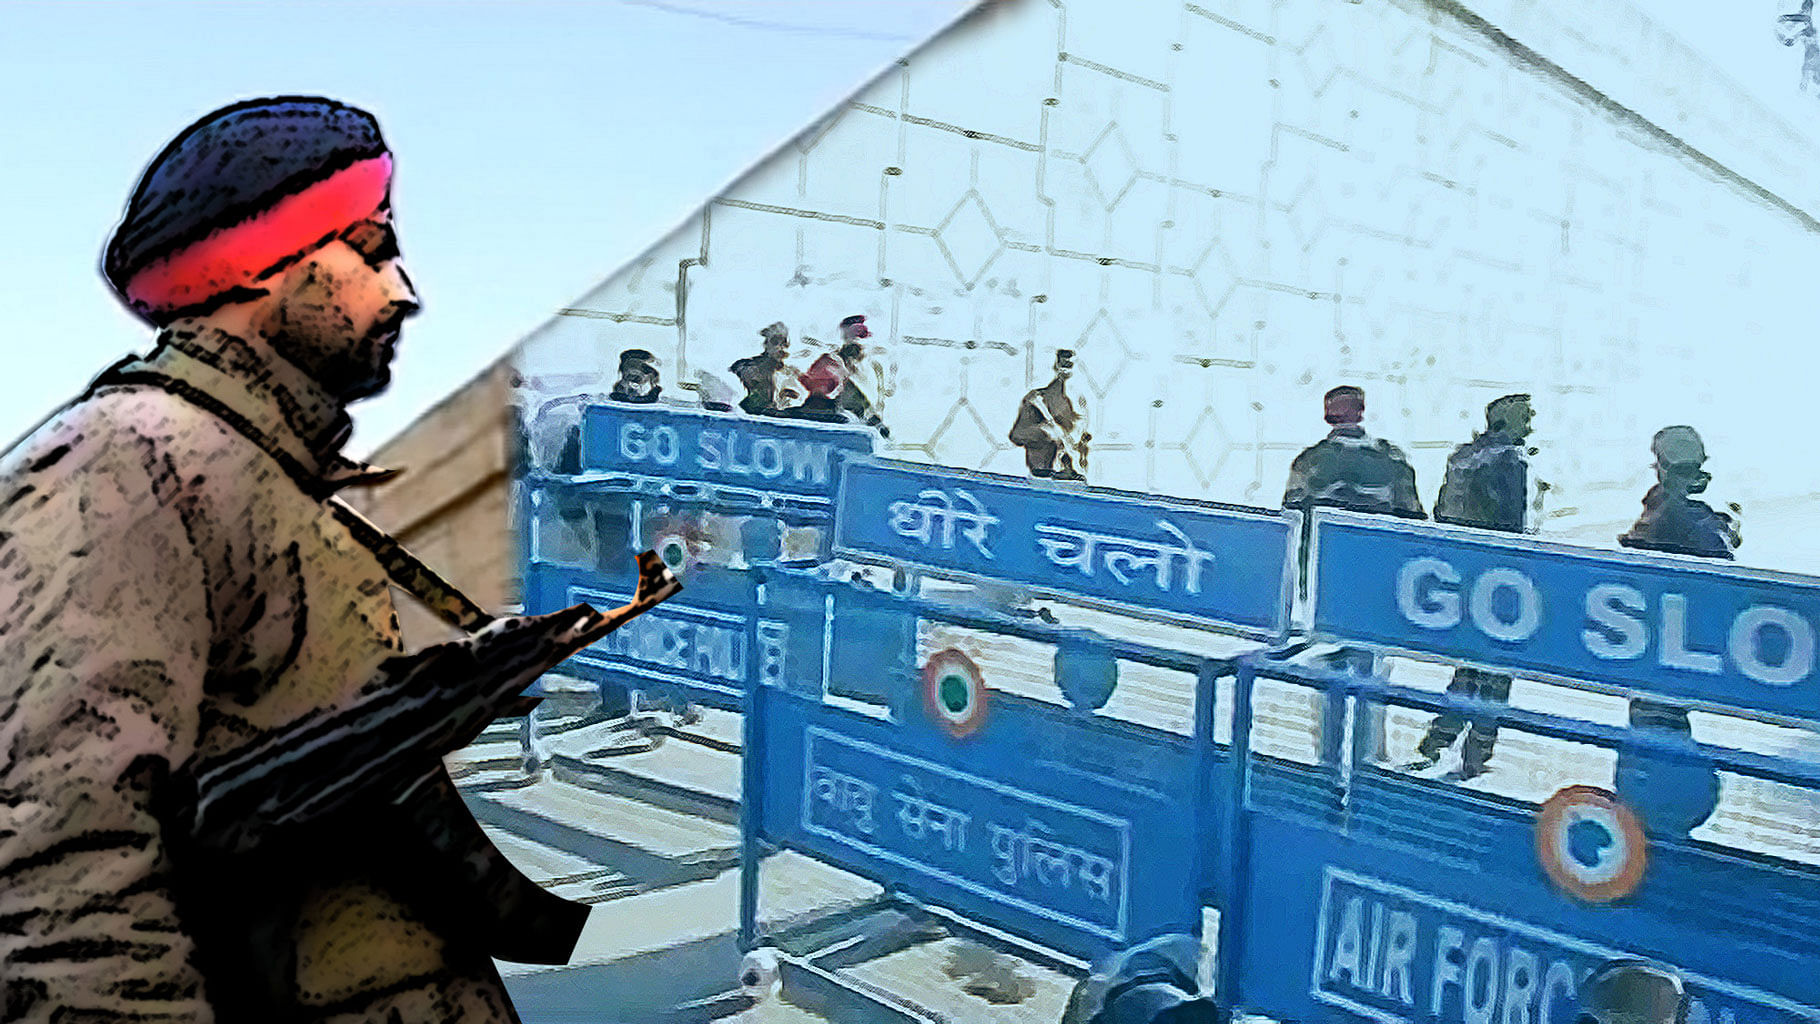 Suspected Jaish-e-Mohammed terrorists opened fire at Pathankot Air Force Base early this morning. (Photo: The Quint)